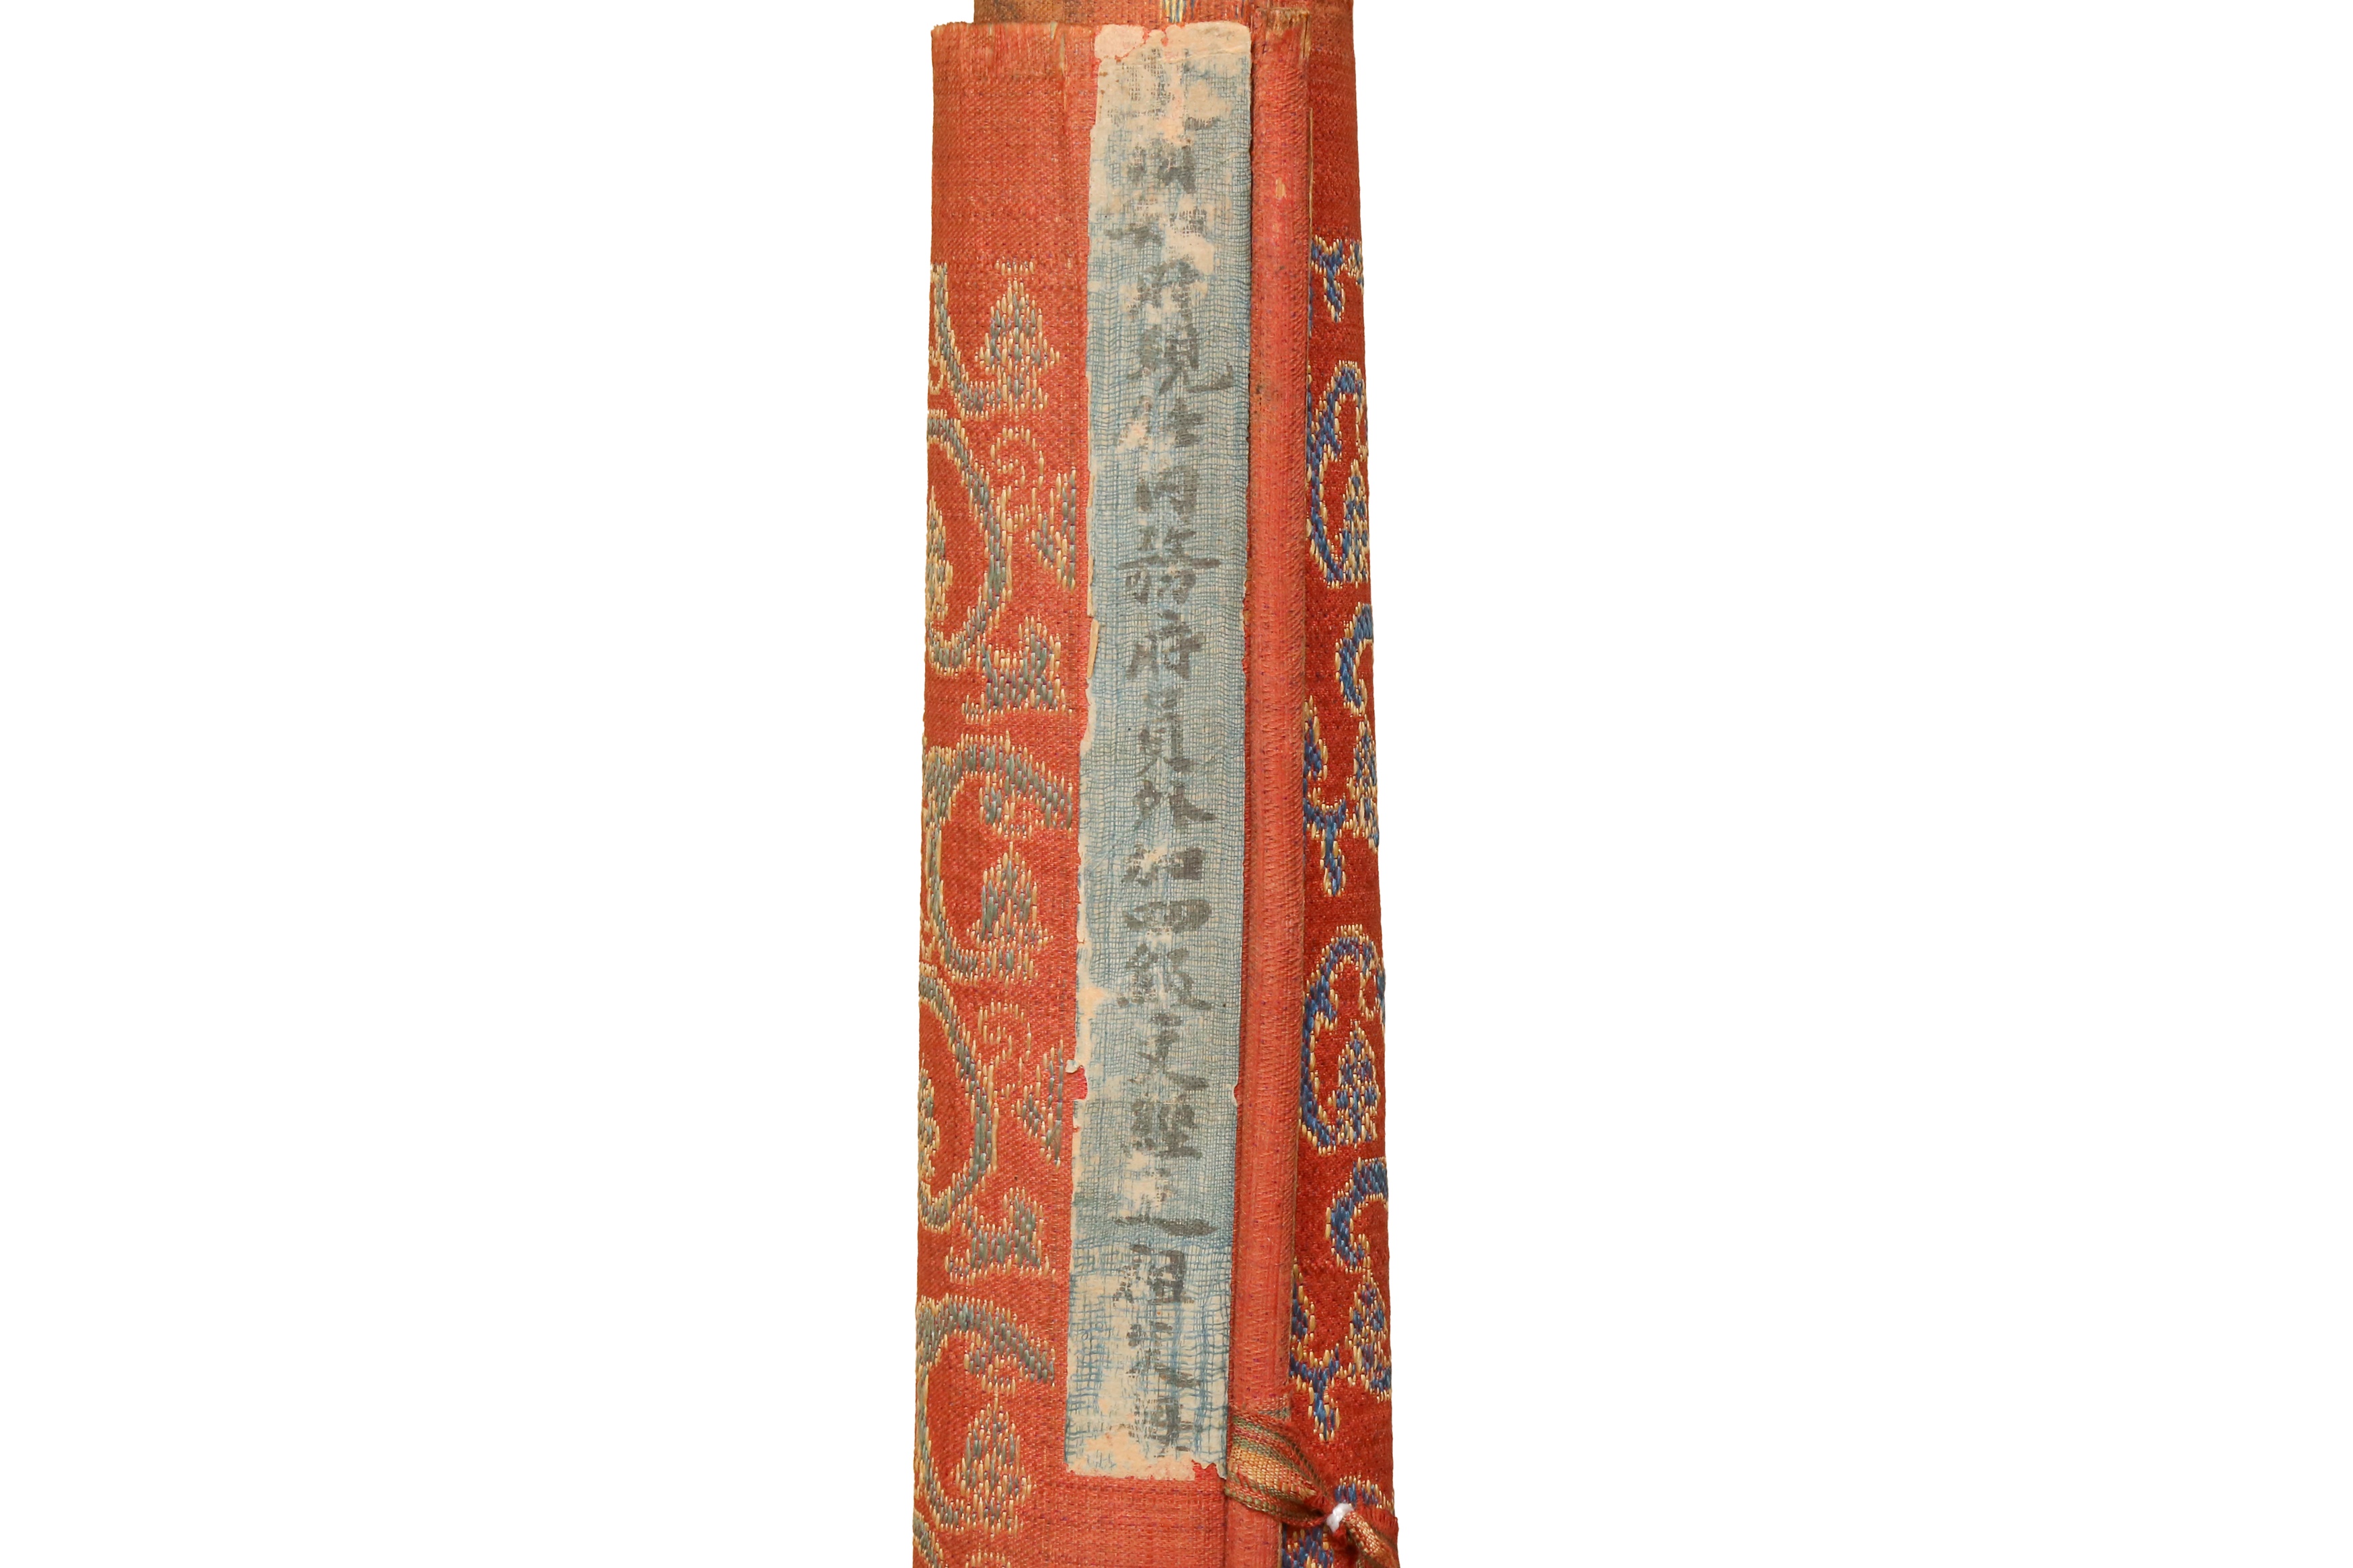 A CHINESE IMPERIAL EDICT HANDSCROLL 清光緒 1894年 世襲誥命文書 - Image 2 of 30